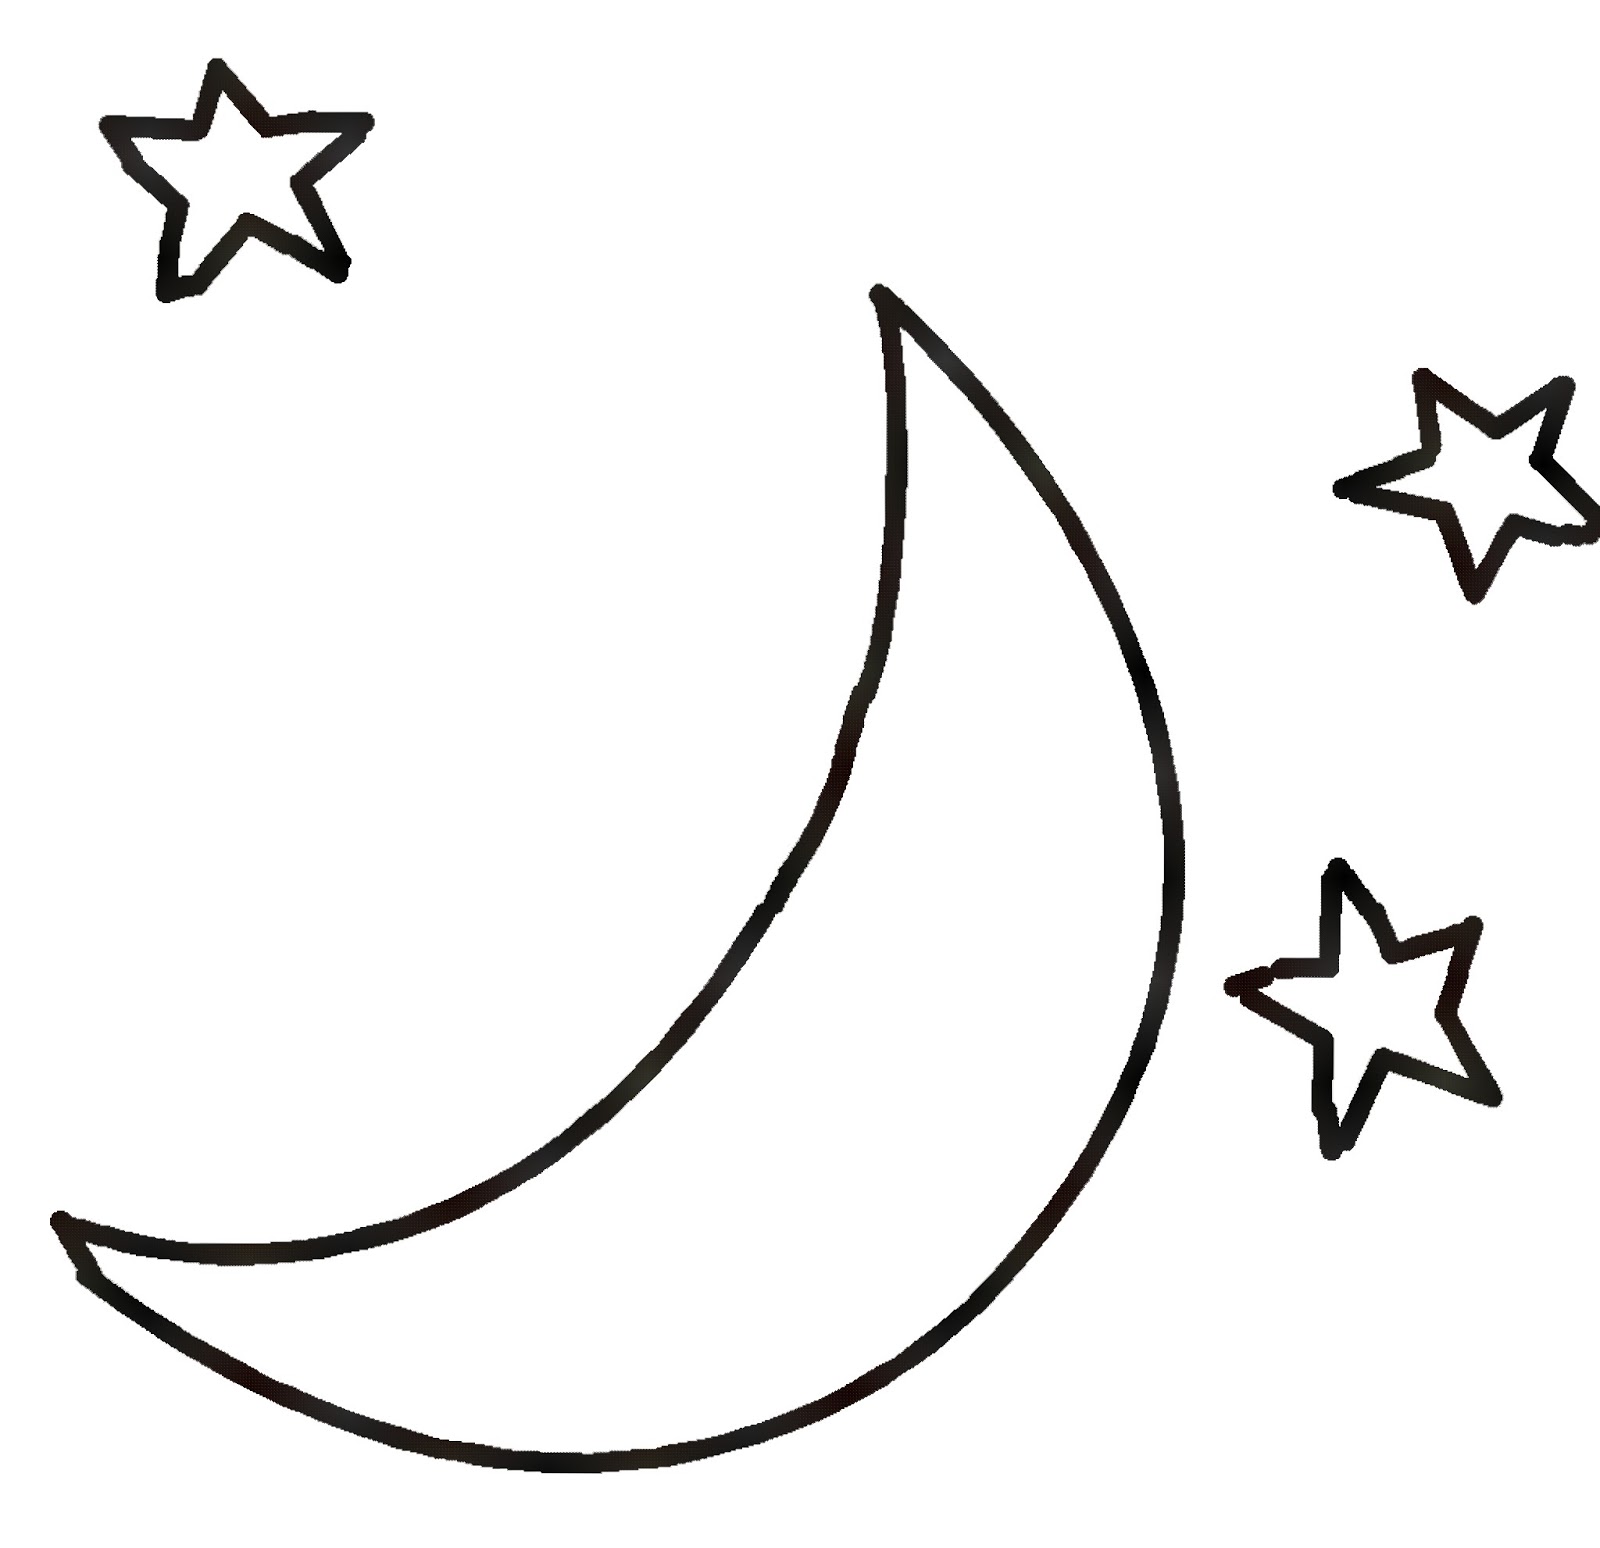 moon and stars clipart - photo #44